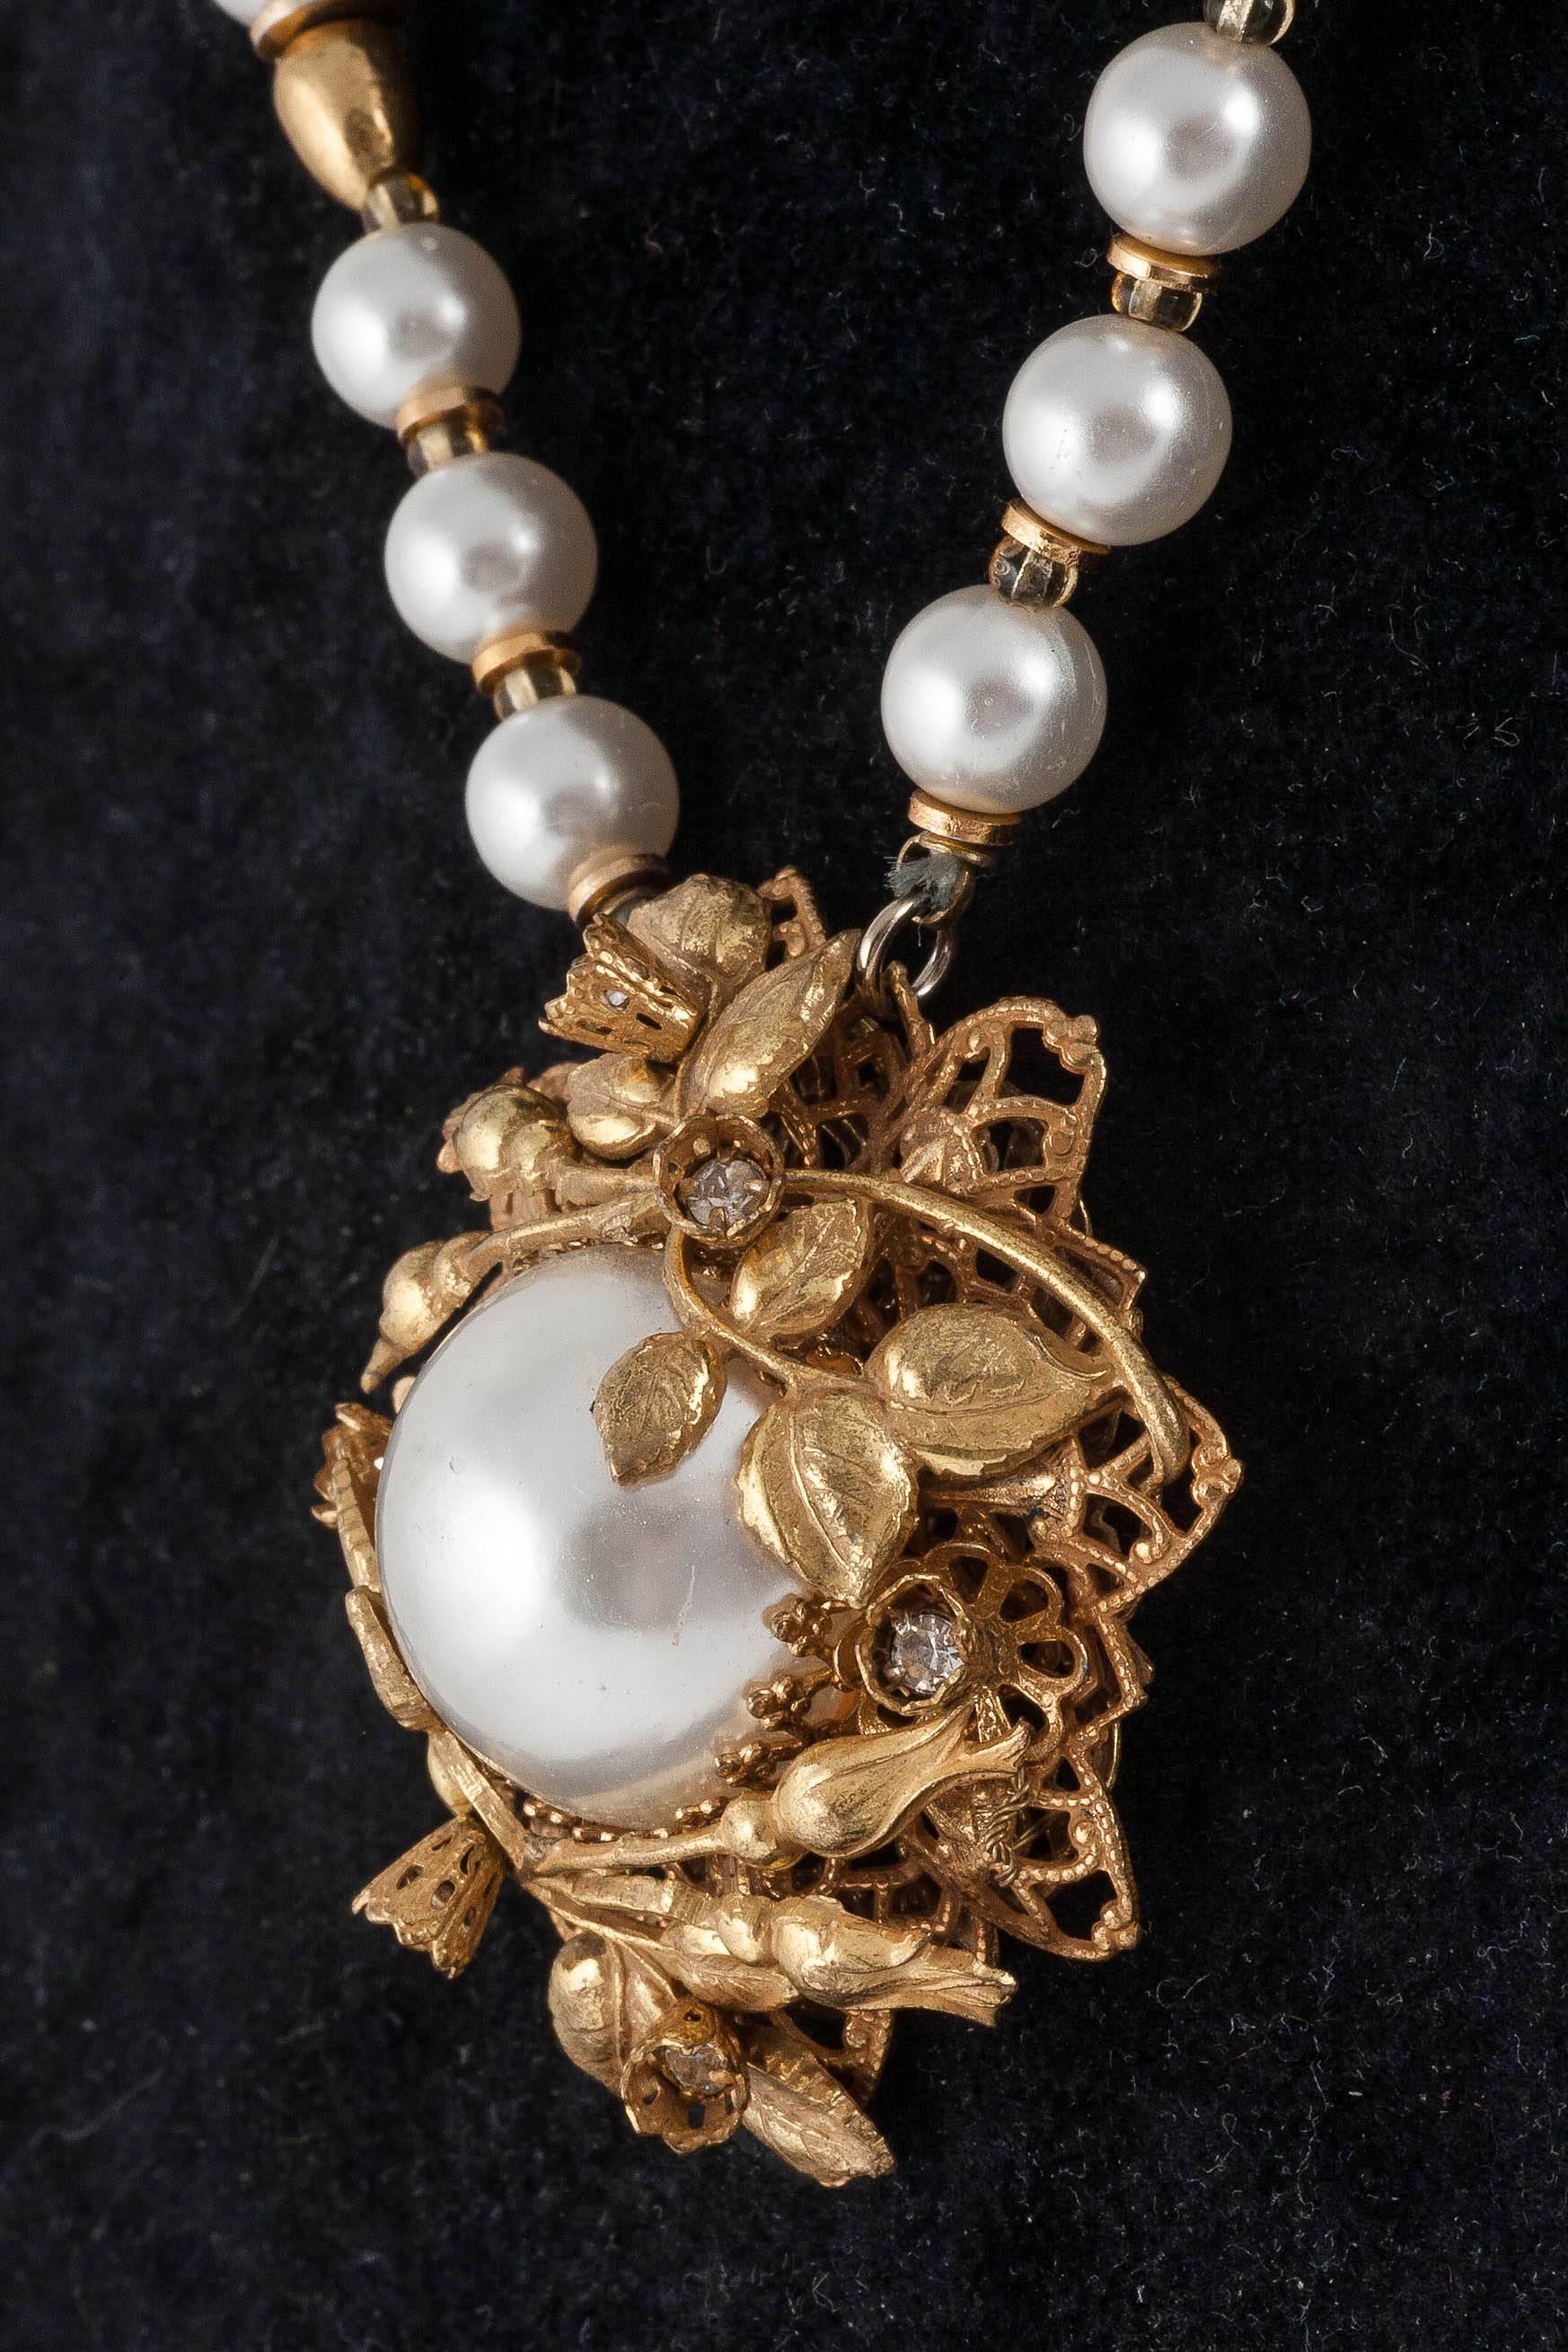 Baroque Revival Wonderfully intricate Stanley Hagler NYC 1980s pearl and Russian gilt pendant 